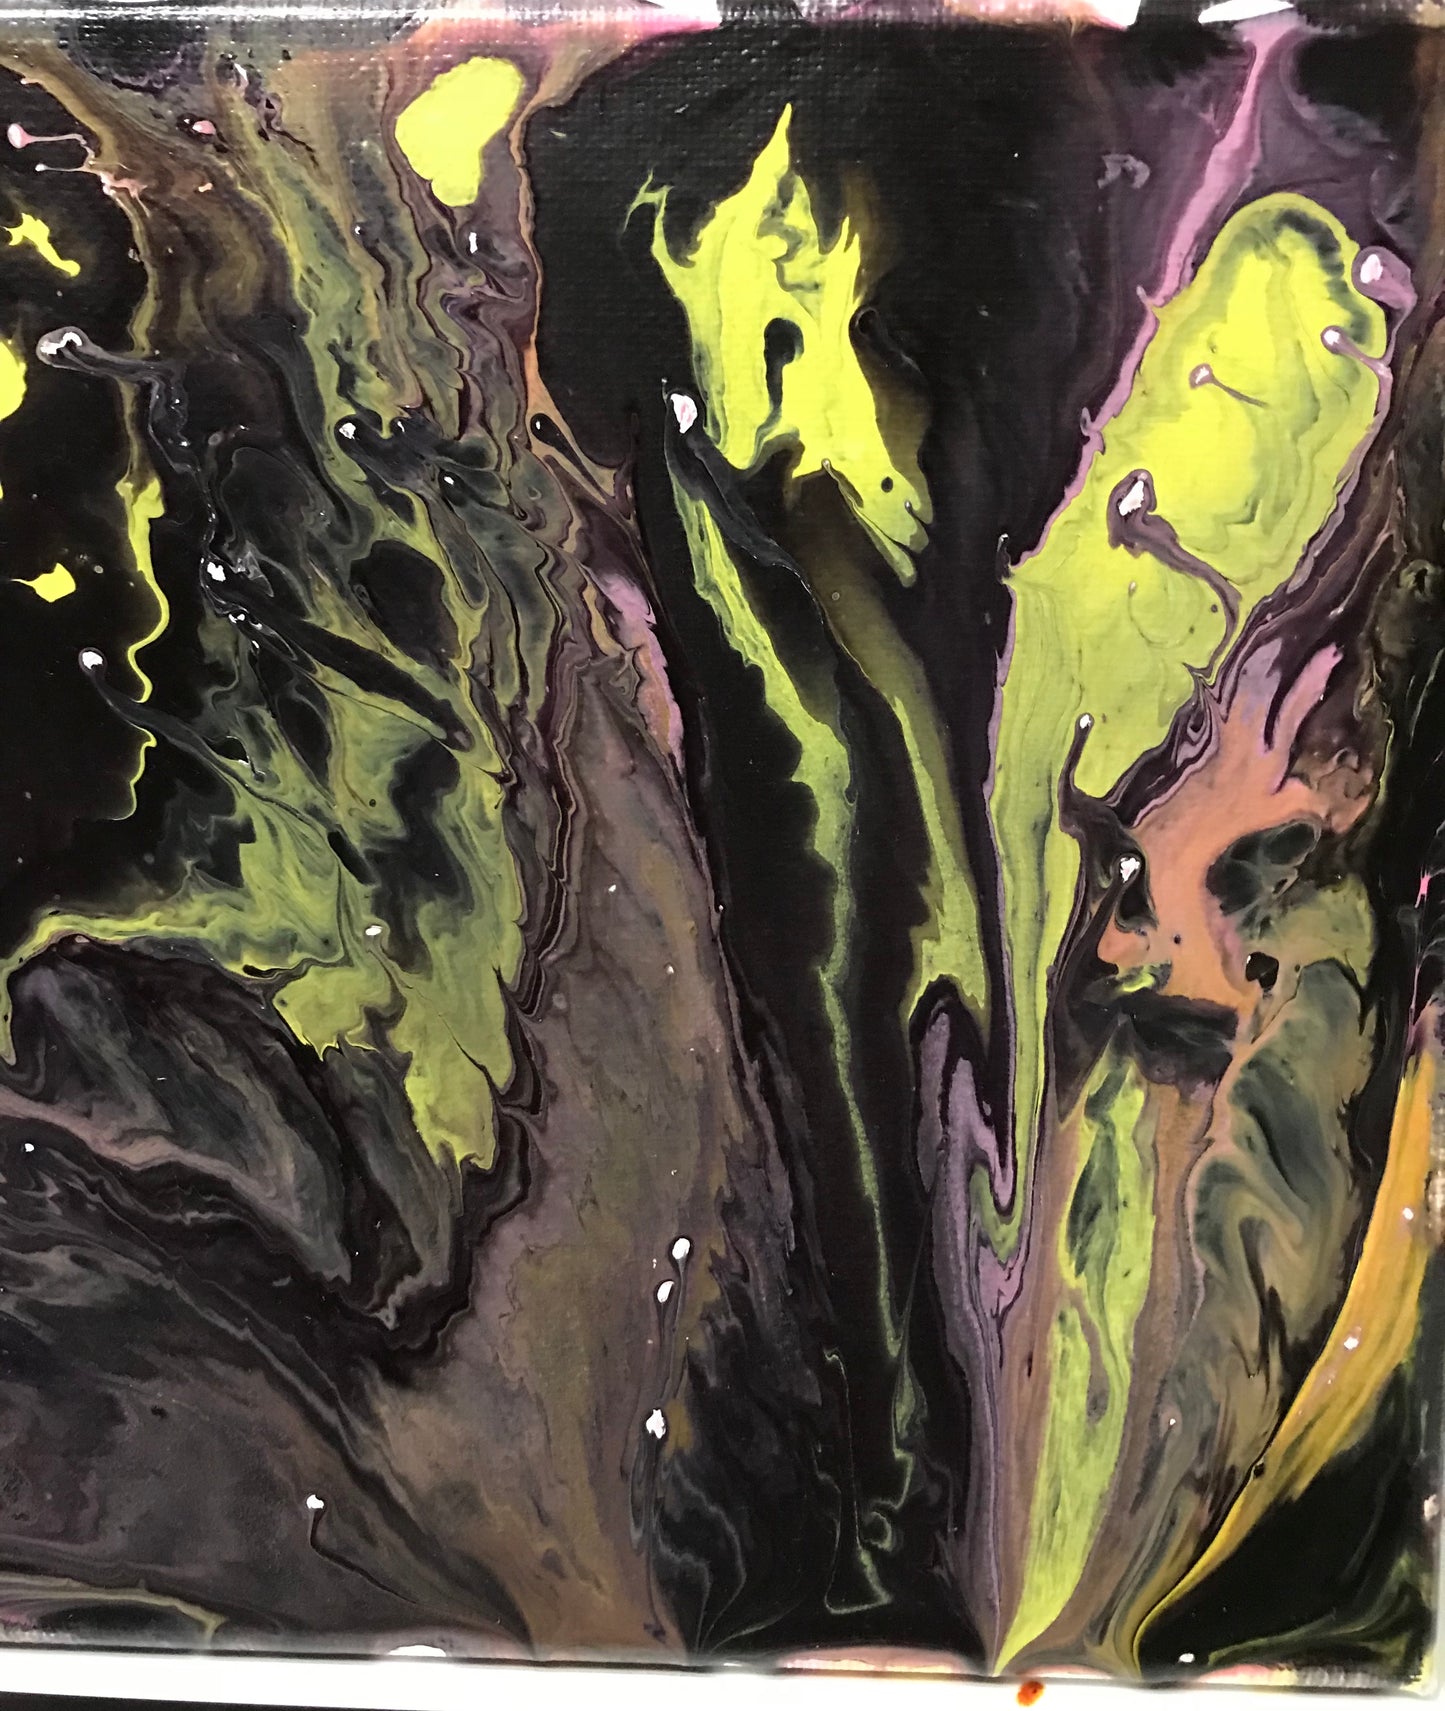 Wed, Oct 26th, 4-6P “Art & Science: Acrylic Pour” Public Houston Painting Class